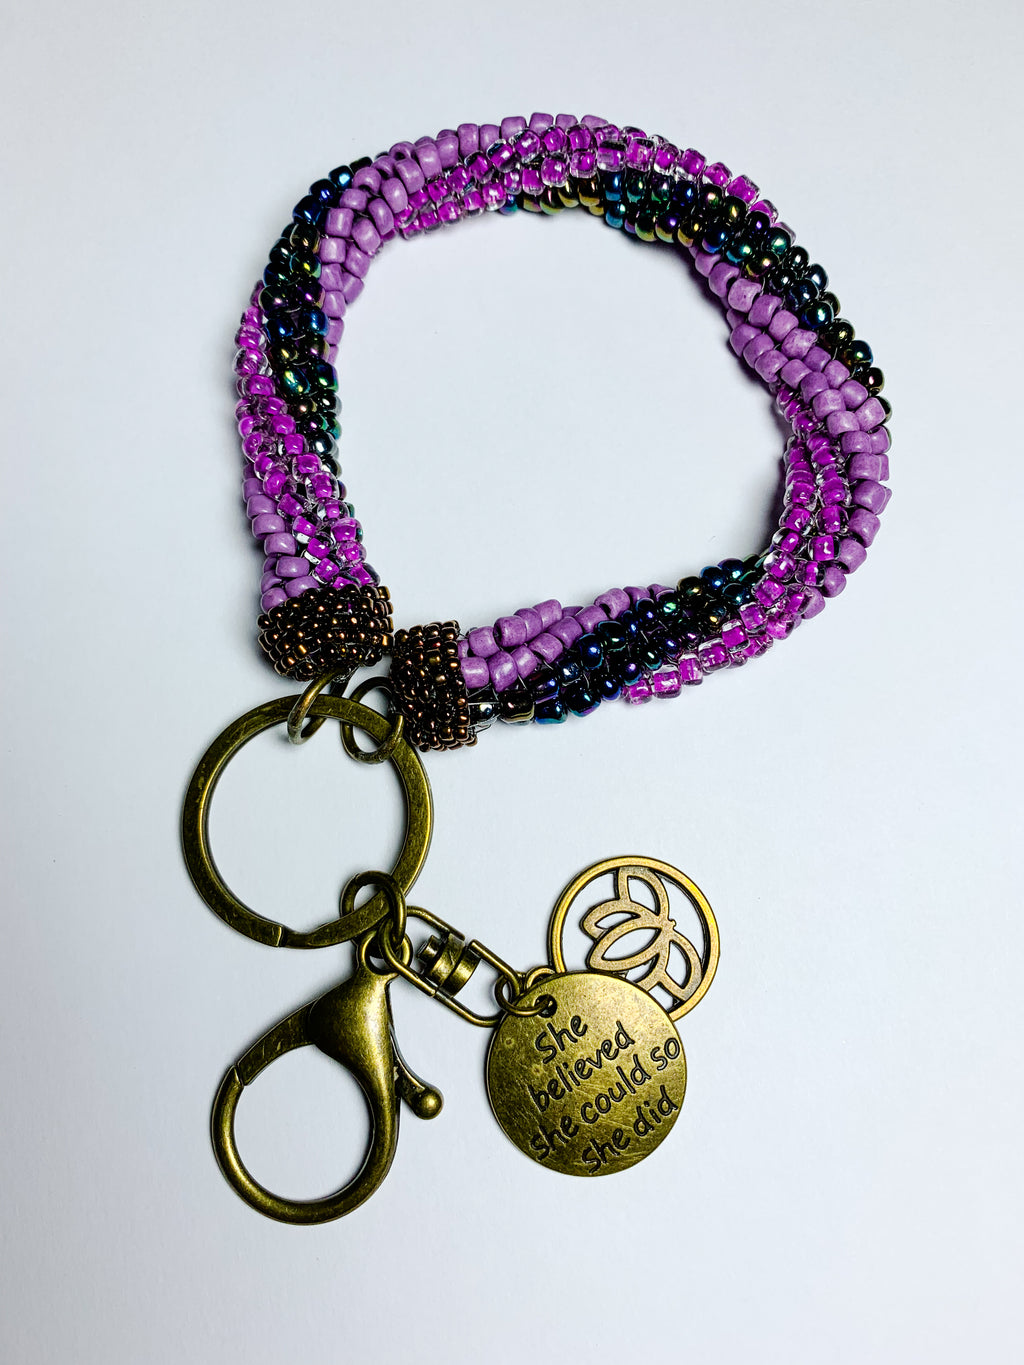 Affirmation Key Keeper "She believed she could so she did"  Bronze, Oil Spill, Lavendar and Magenta Seed Beads